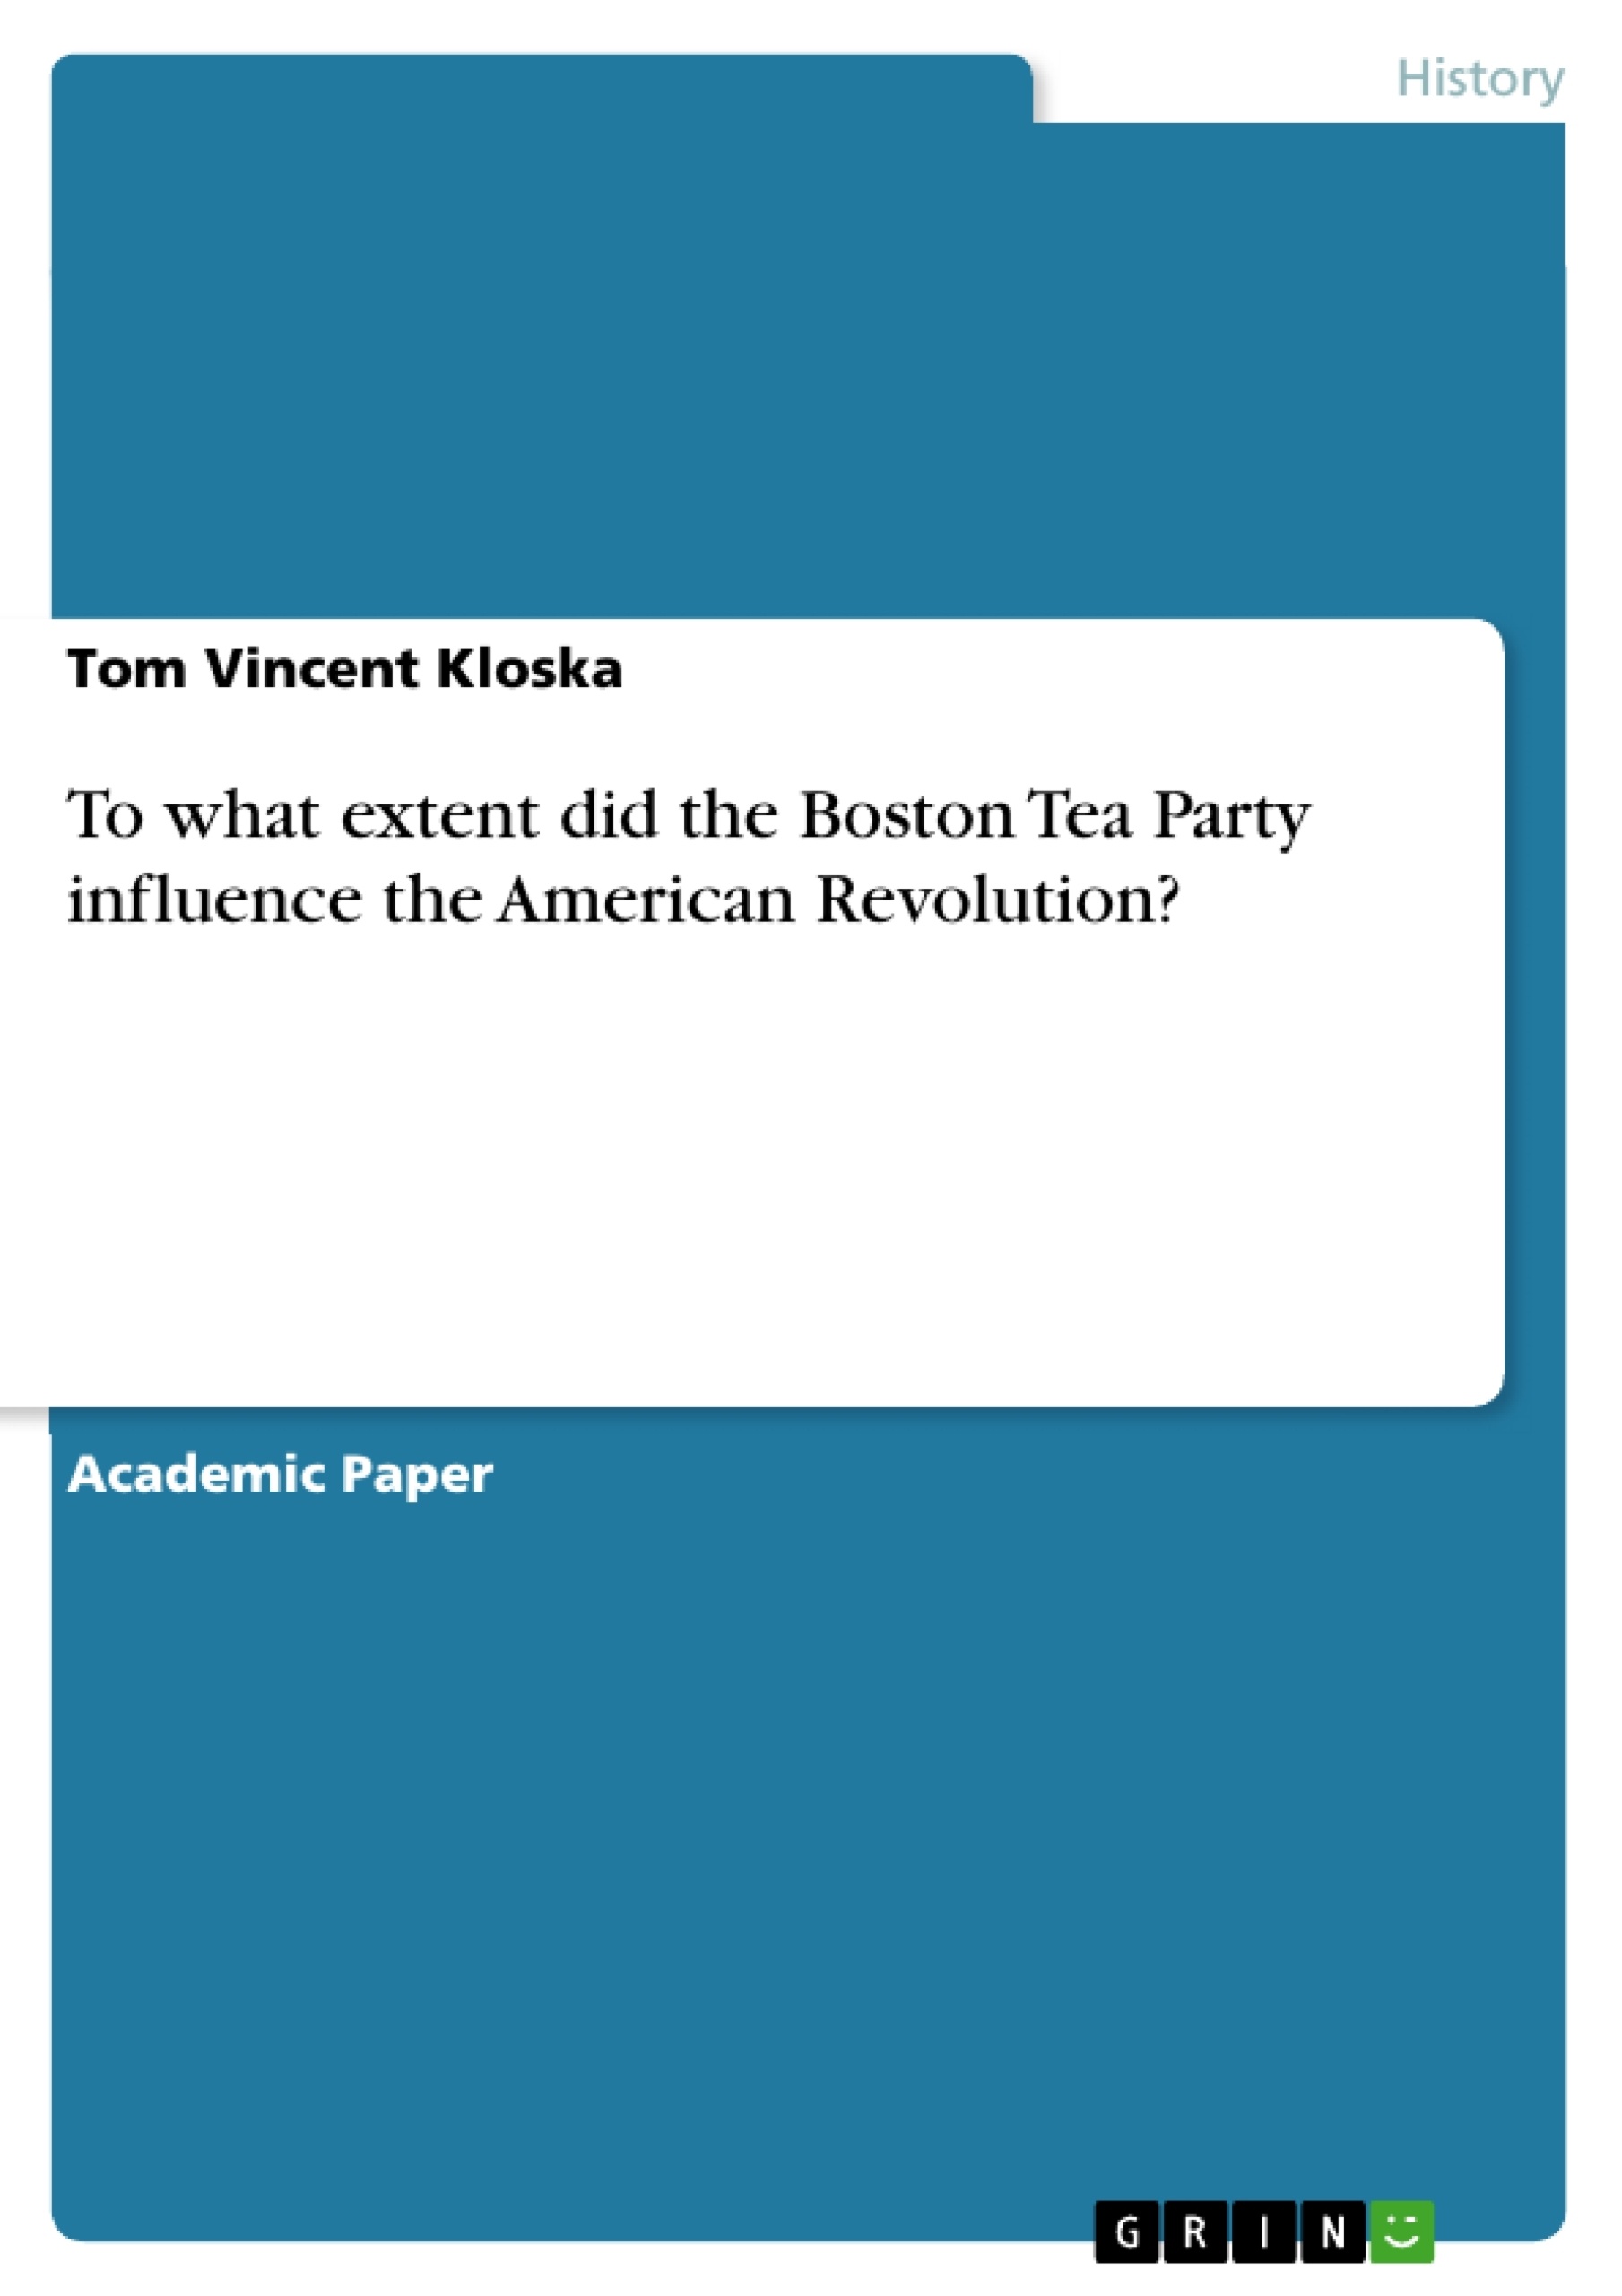 Título: To what extent did the Boston Tea Party influence the American Revolution?